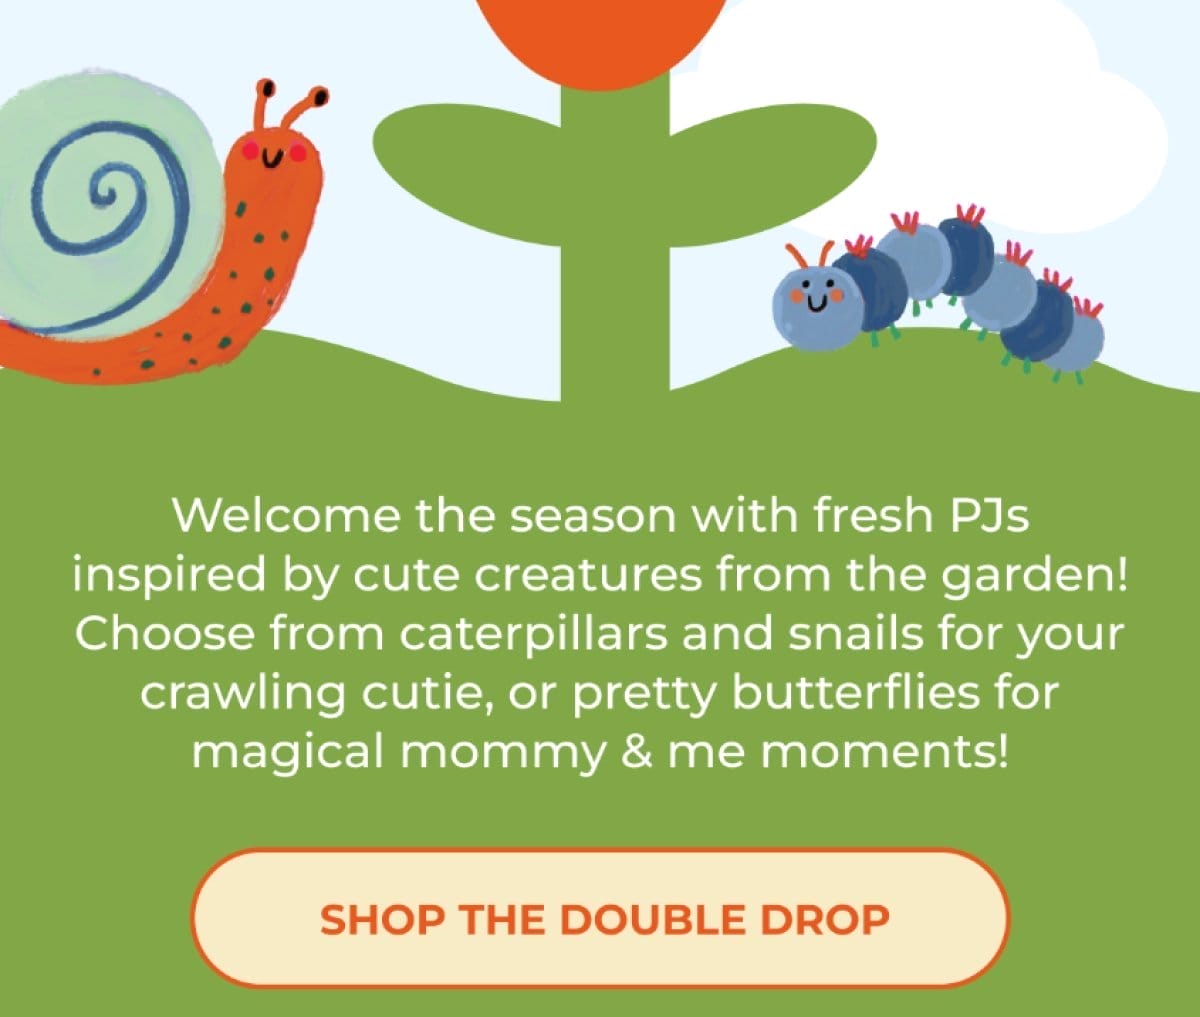 Welcome the season with fresh PJs inspired by cute creatures from the garden! Choose from caterpillars and snails for your crawling cutie, or pretty butterflies for magical mommy & me moments! | SHOP THE DOUBLE DROP